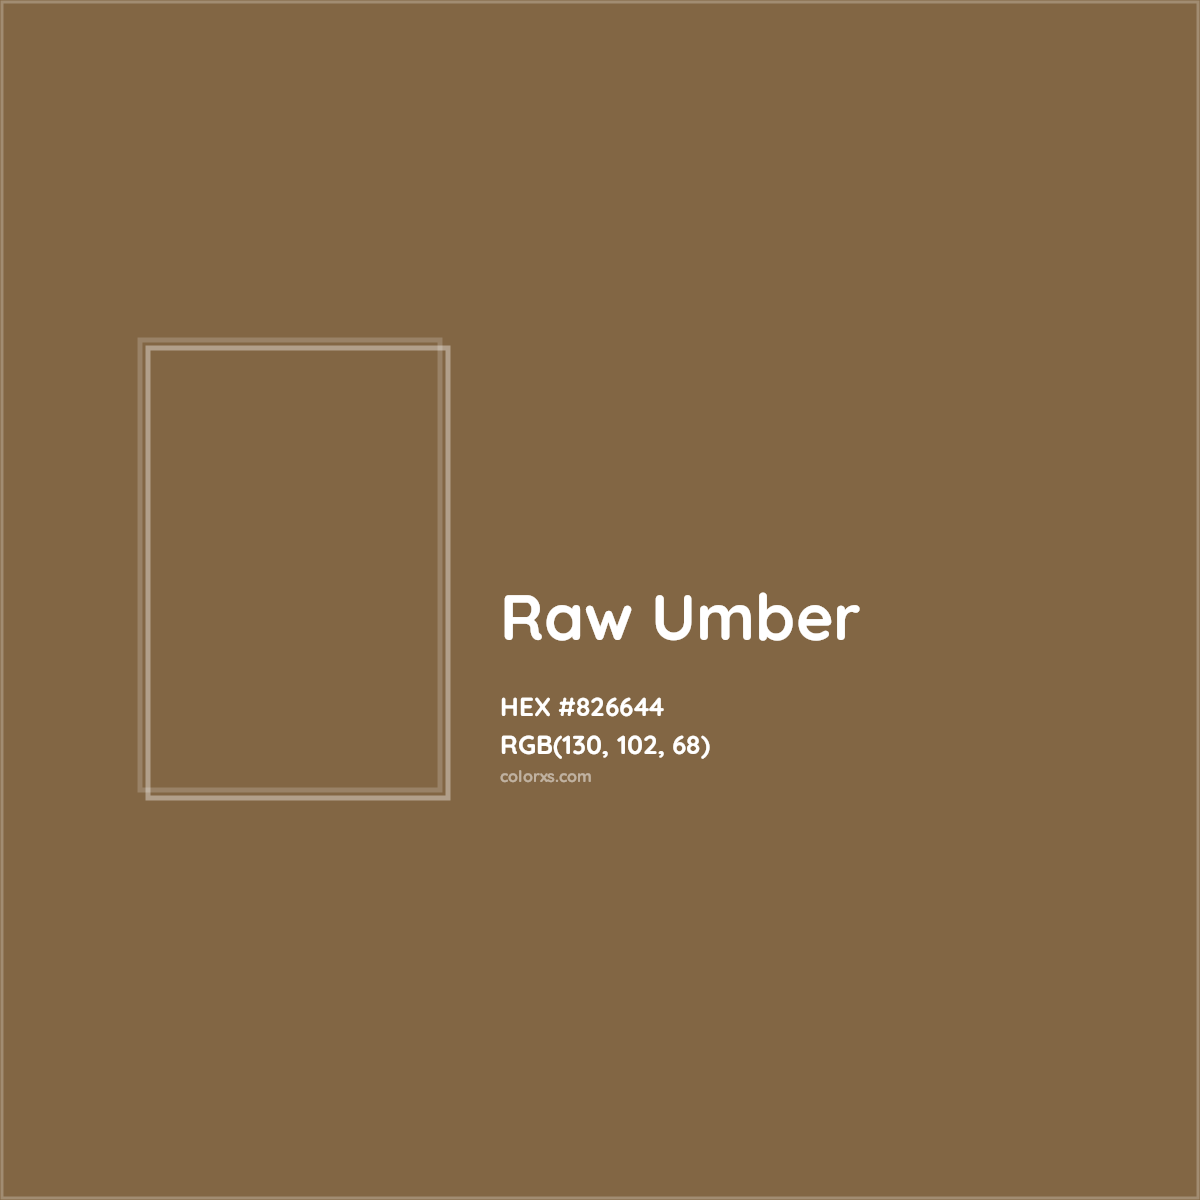 HEX #826644 Raw Umber Color - Color Code